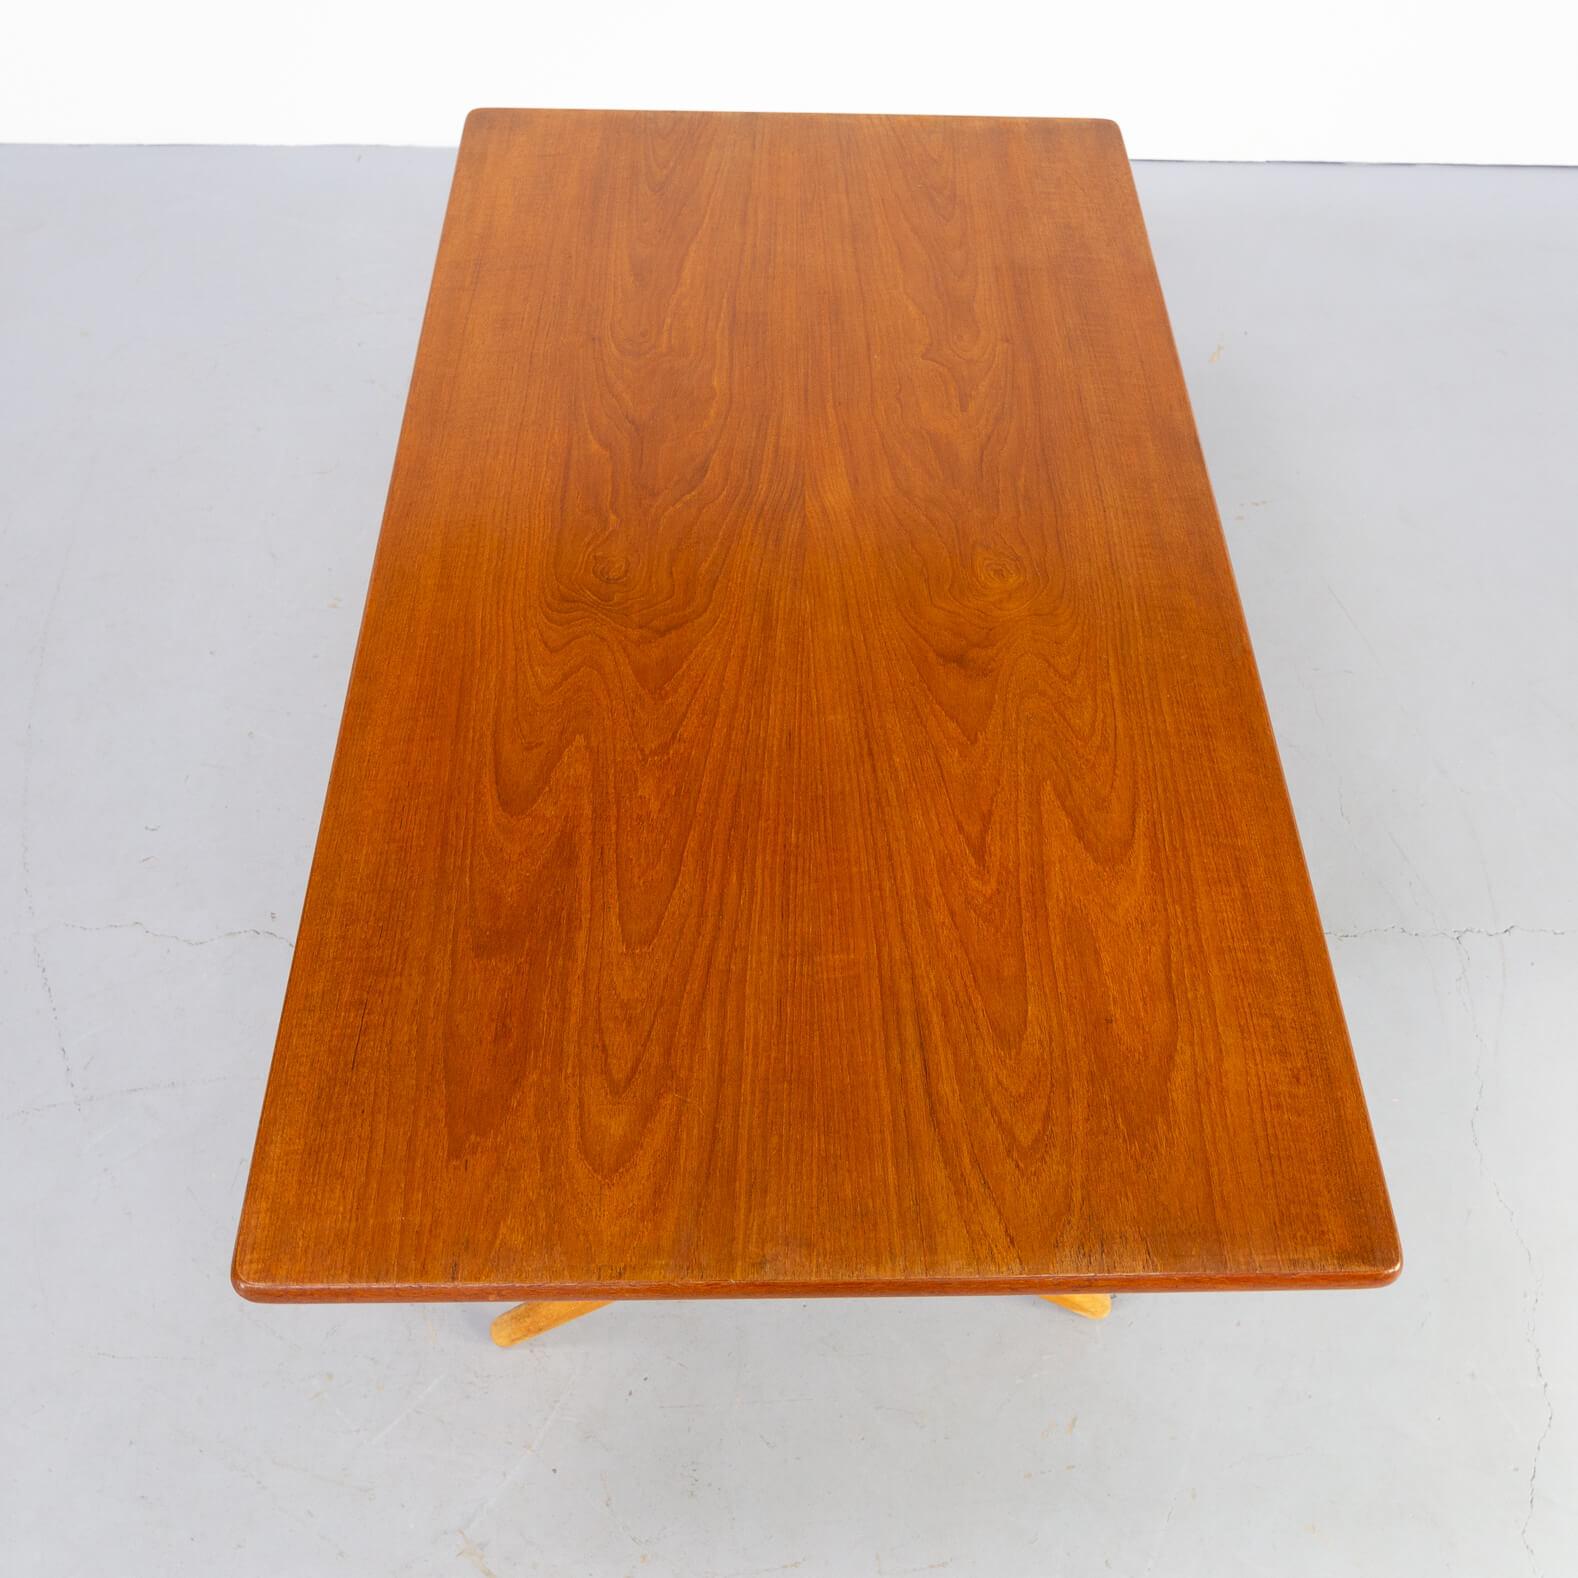 60s Hans J. Wegner ‘AT-303’ Dining Table for Andreas Tuck For Sale 2